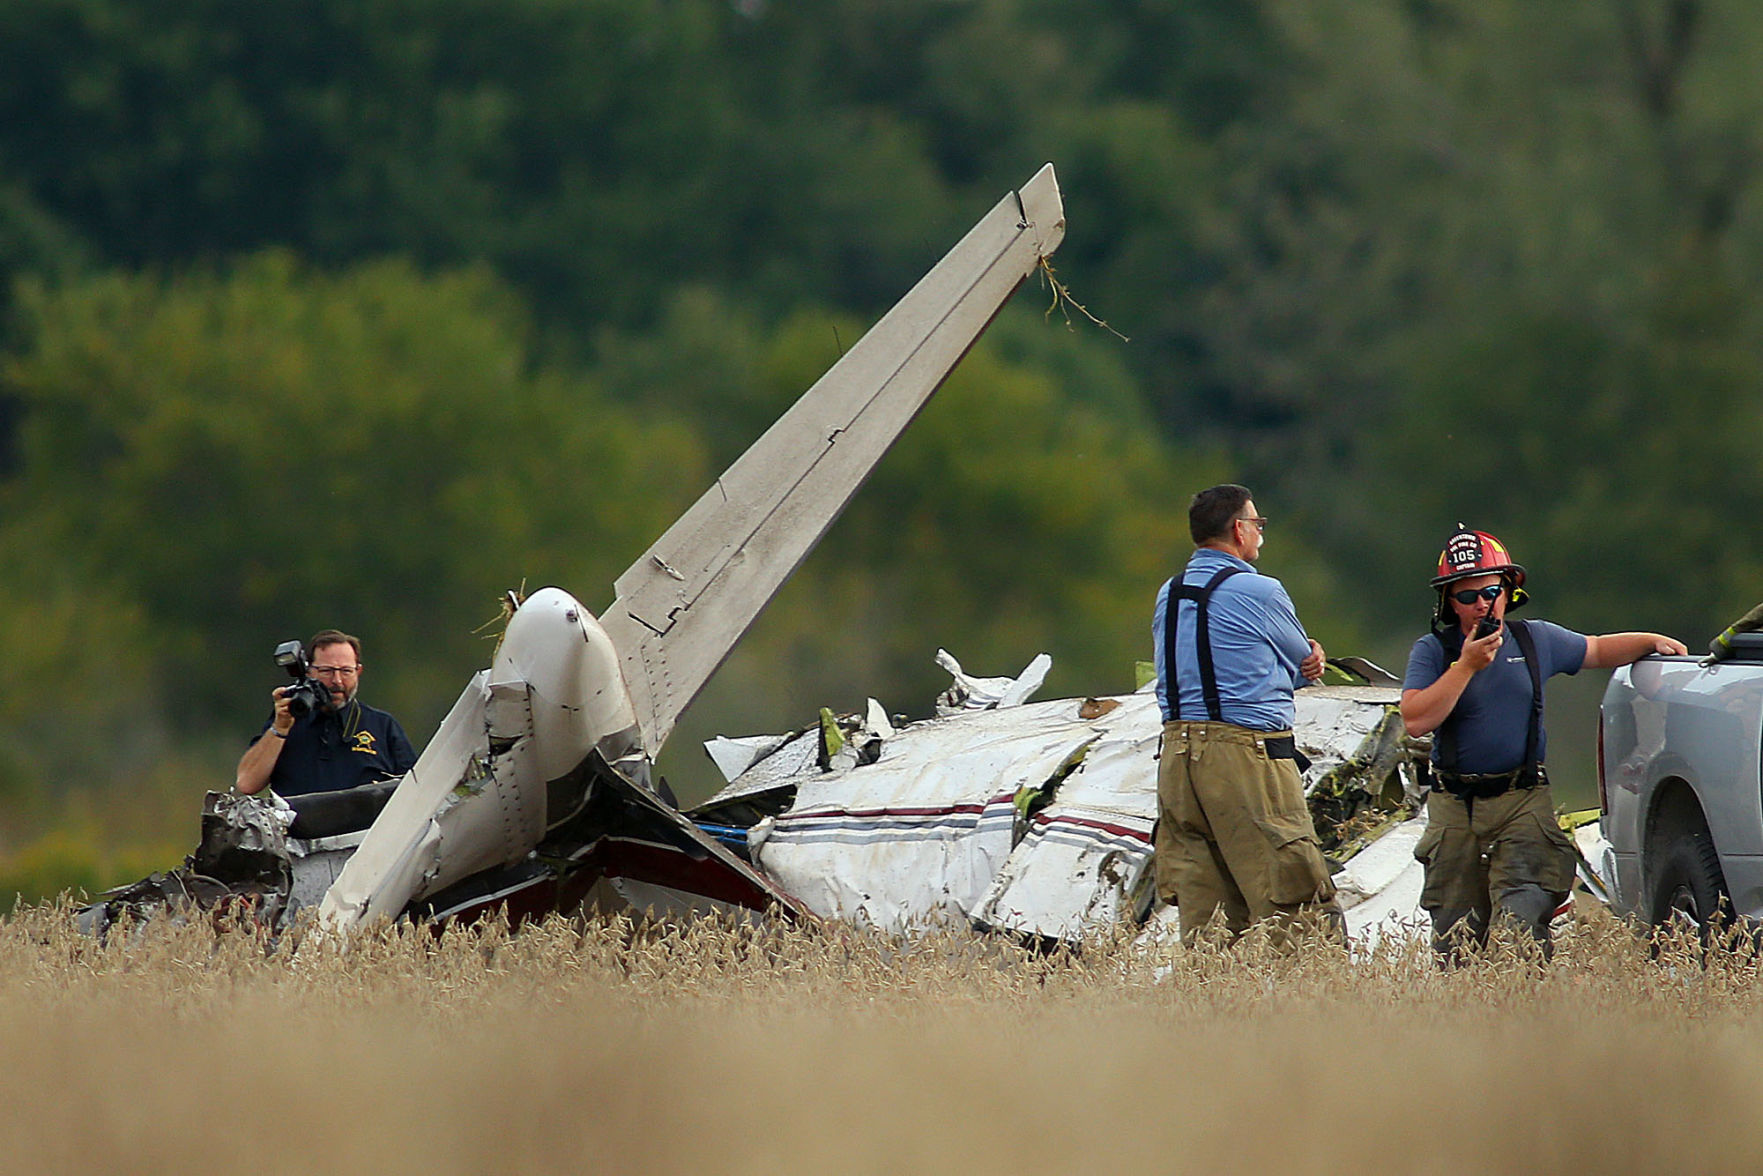 list of recent plane crashes in america